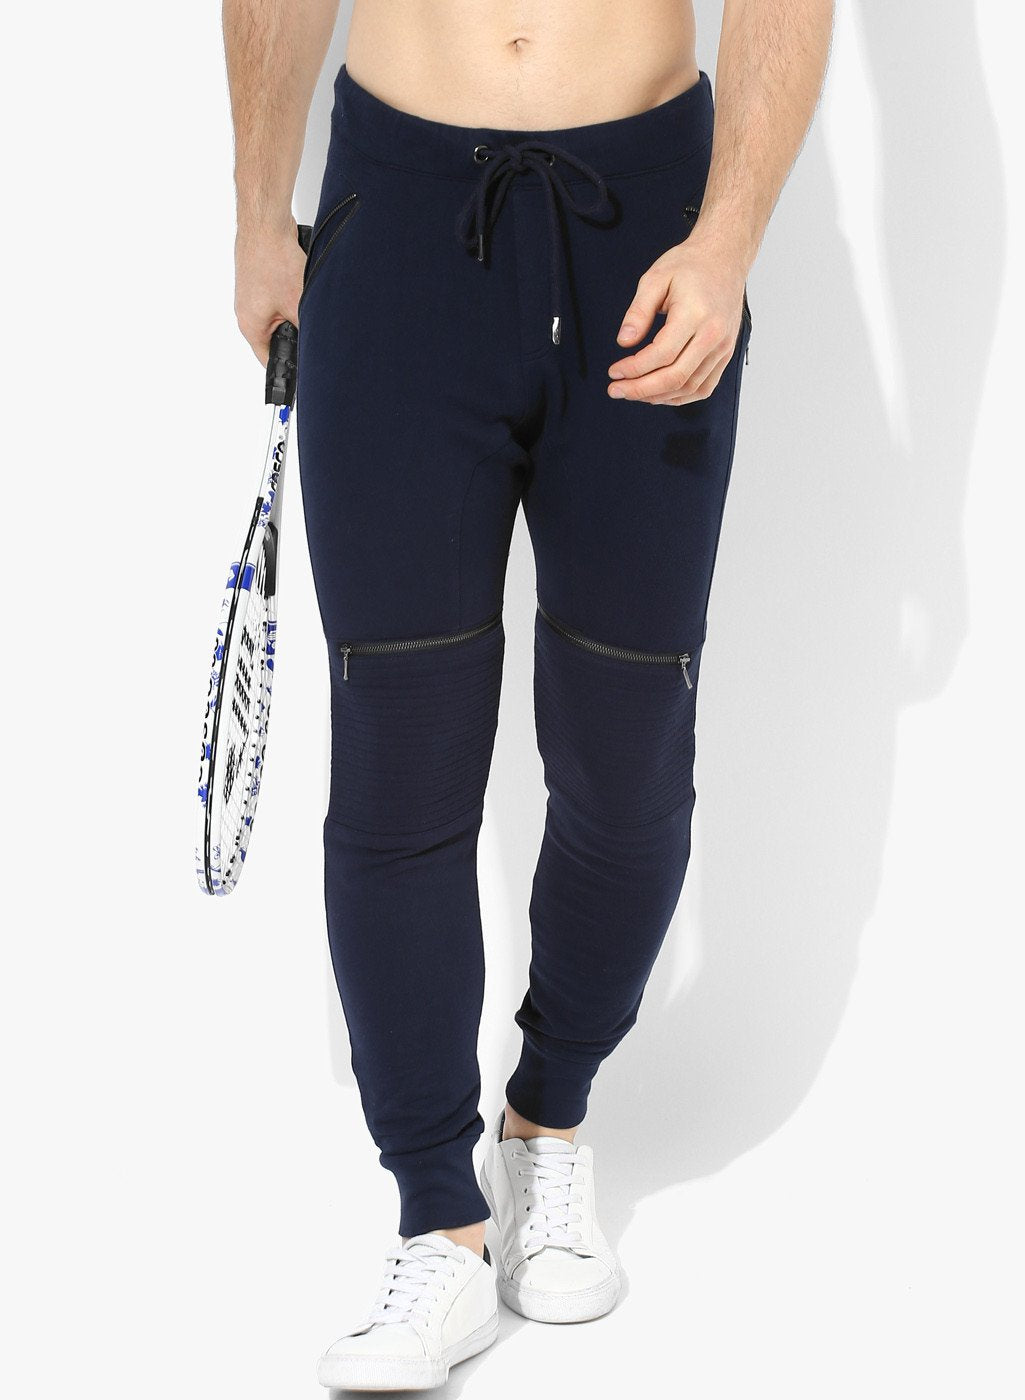 Spiritual Warrior navy joggers for men are both comfortable & high quality. They keep you cool and dry. These navy sweatpants are great for yoga, gym, relaxing